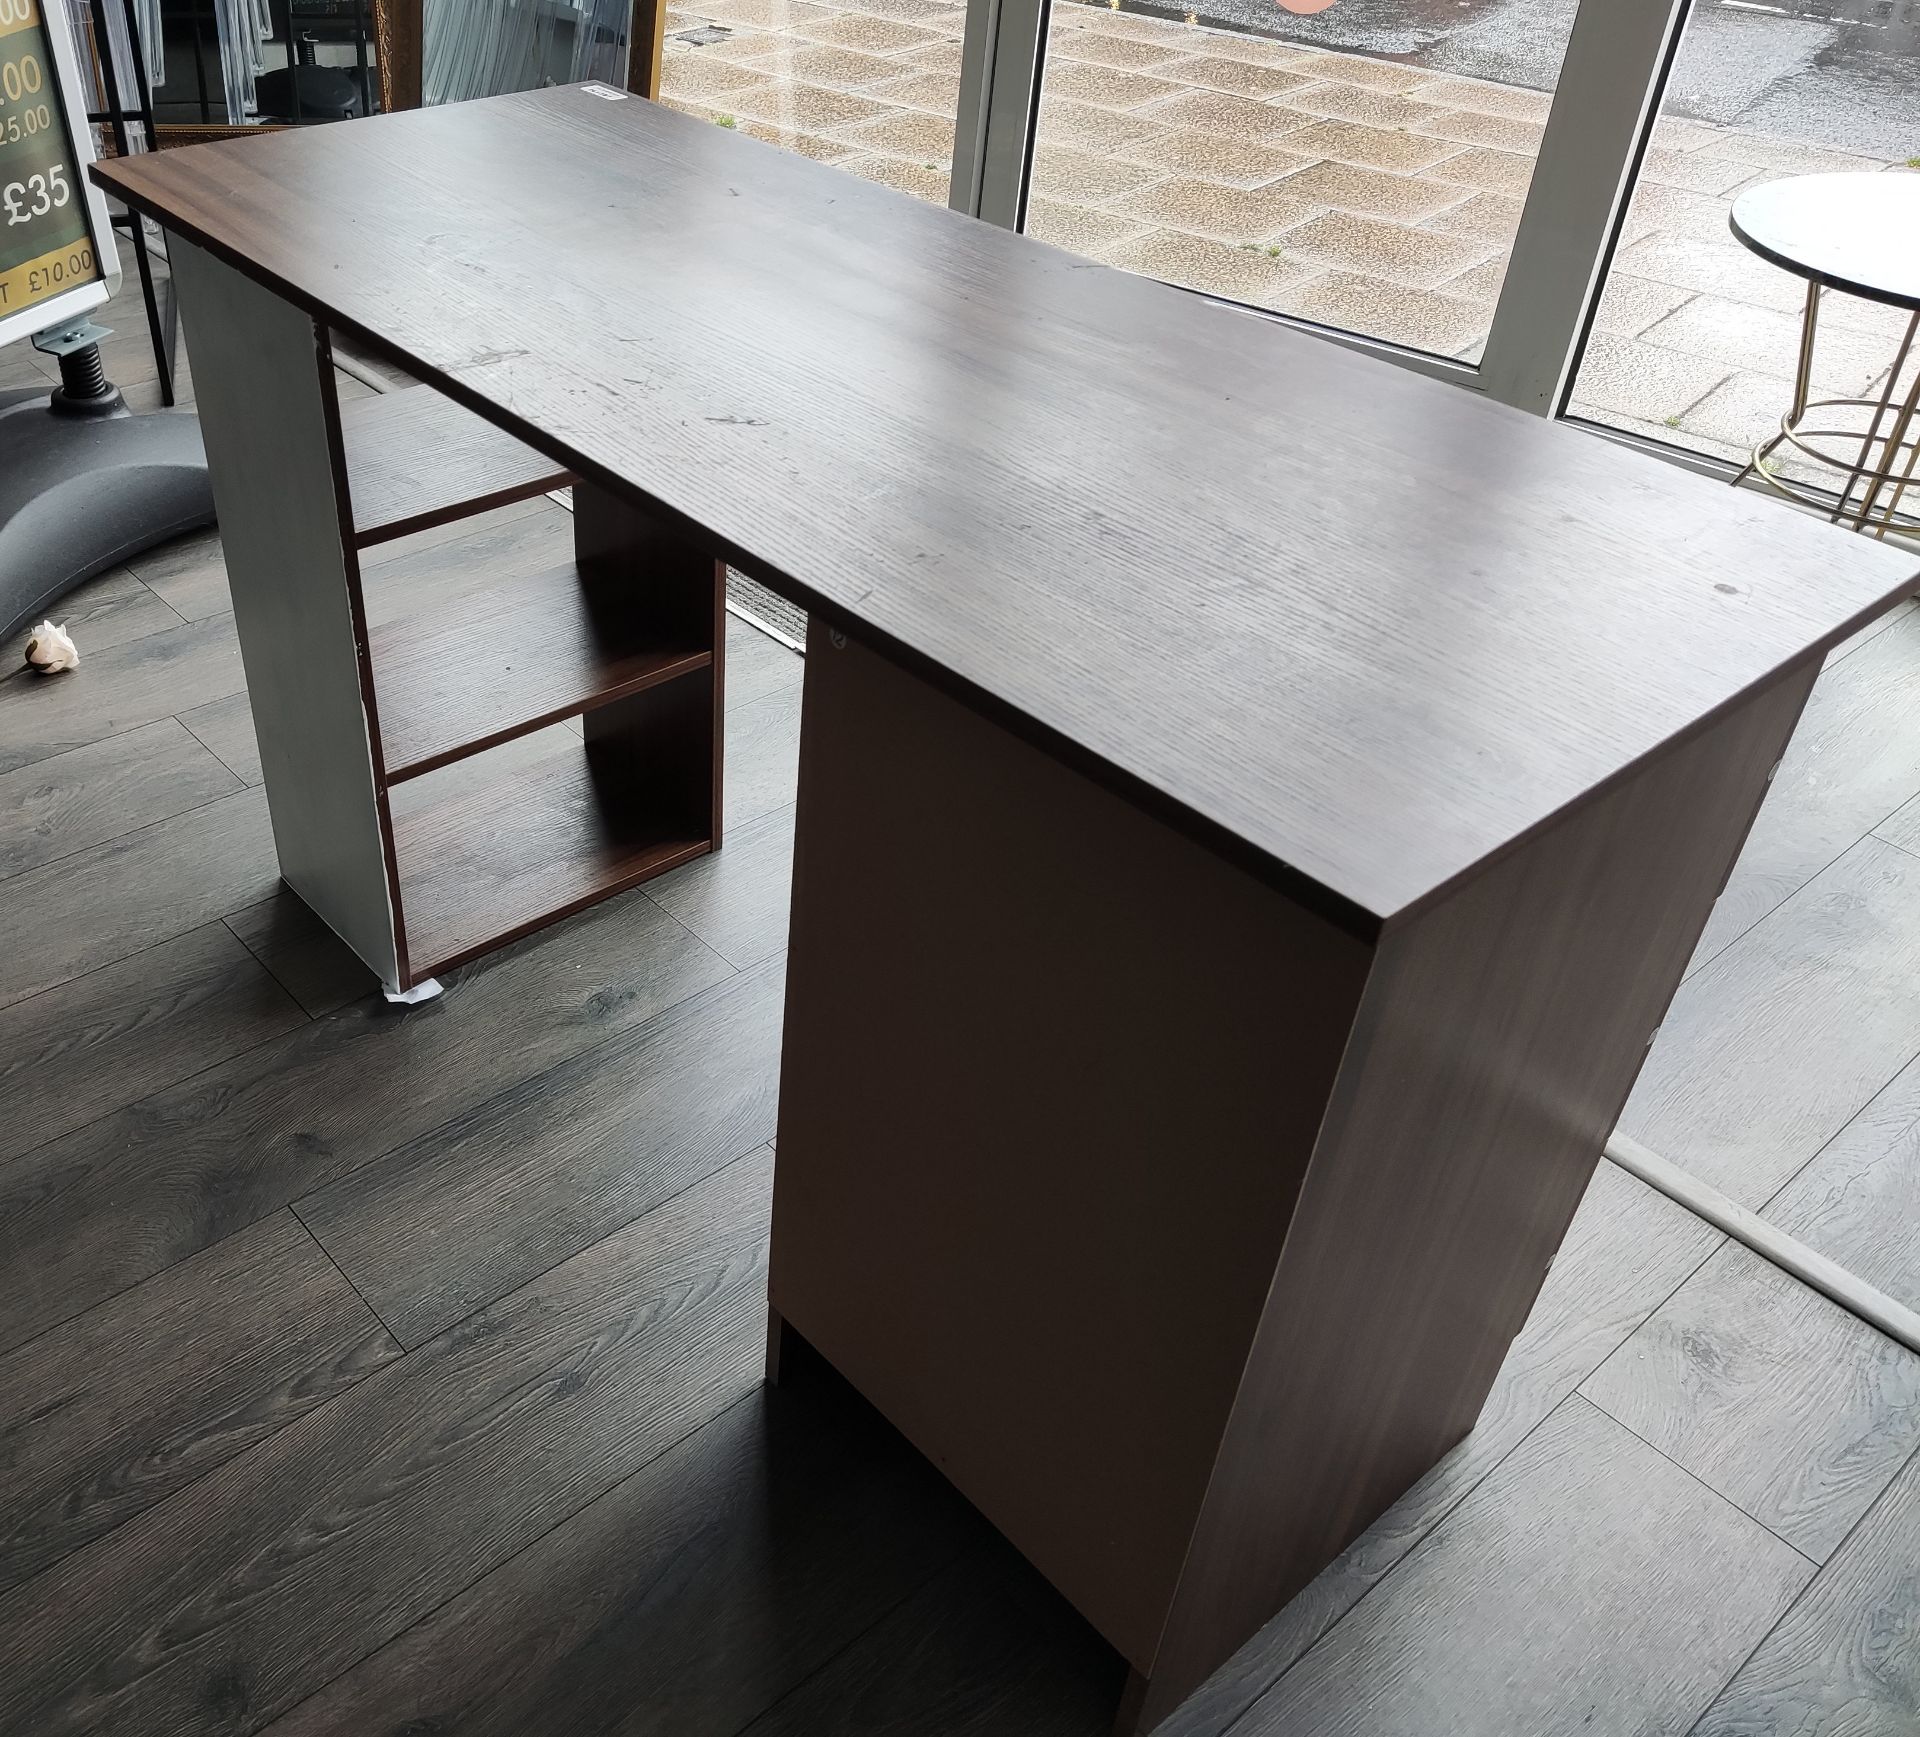 1 x Wooden Office Desk with Integrated Drawers and Shelves - LBC134 - CL763- Location: Sale M33< - Image 6 of 6